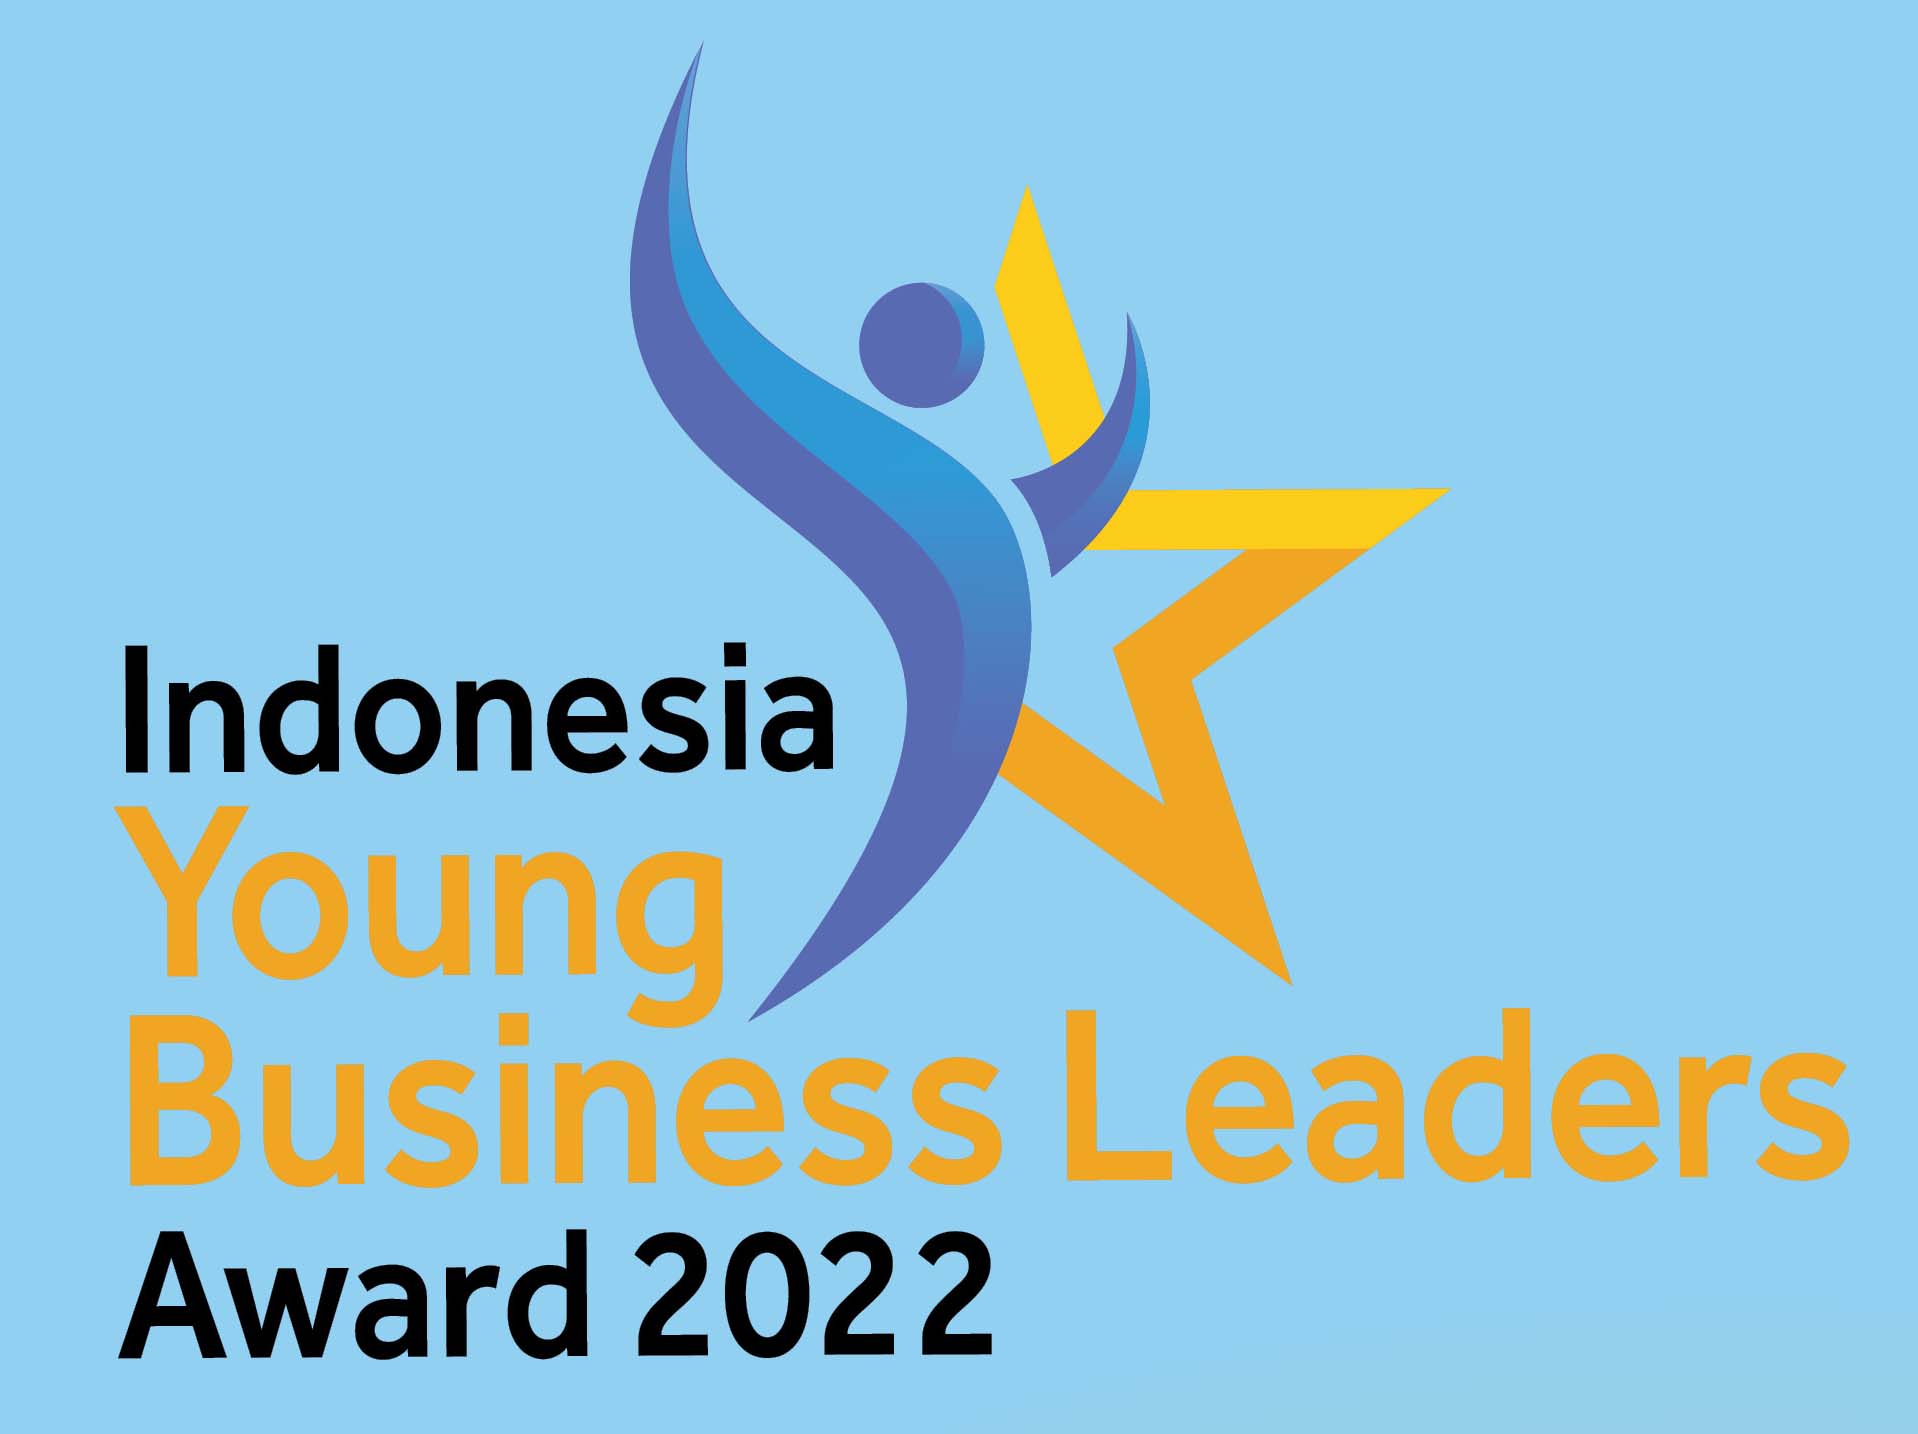 Indonesia Young Business Leaders Award 2022